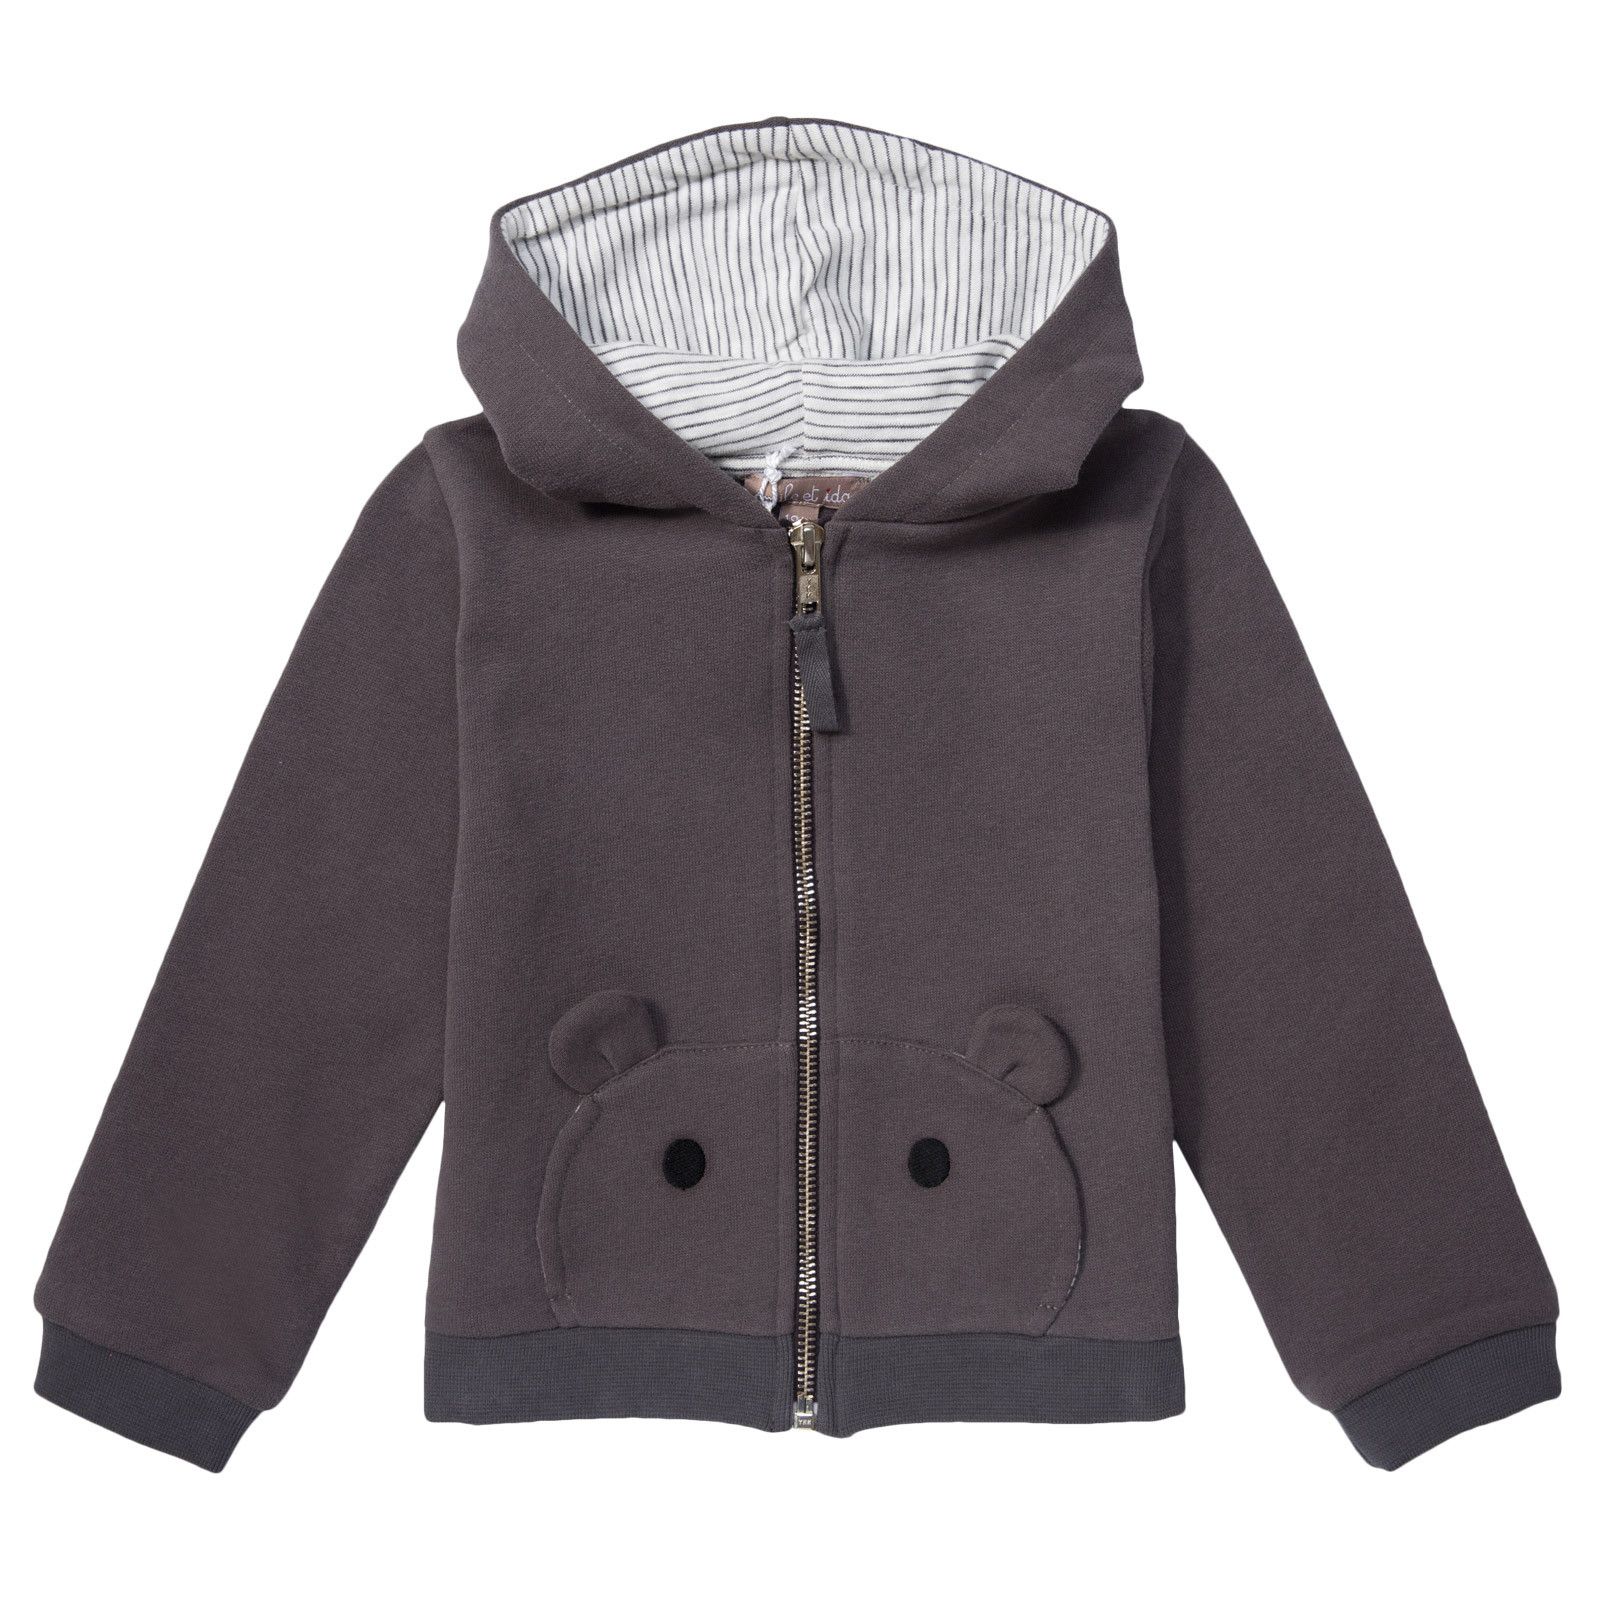 Baby Boys Dark Grey Hooded Zip-up Tops With Monster Pockets - CÉMAROSE | Children's Fashion Store - 1